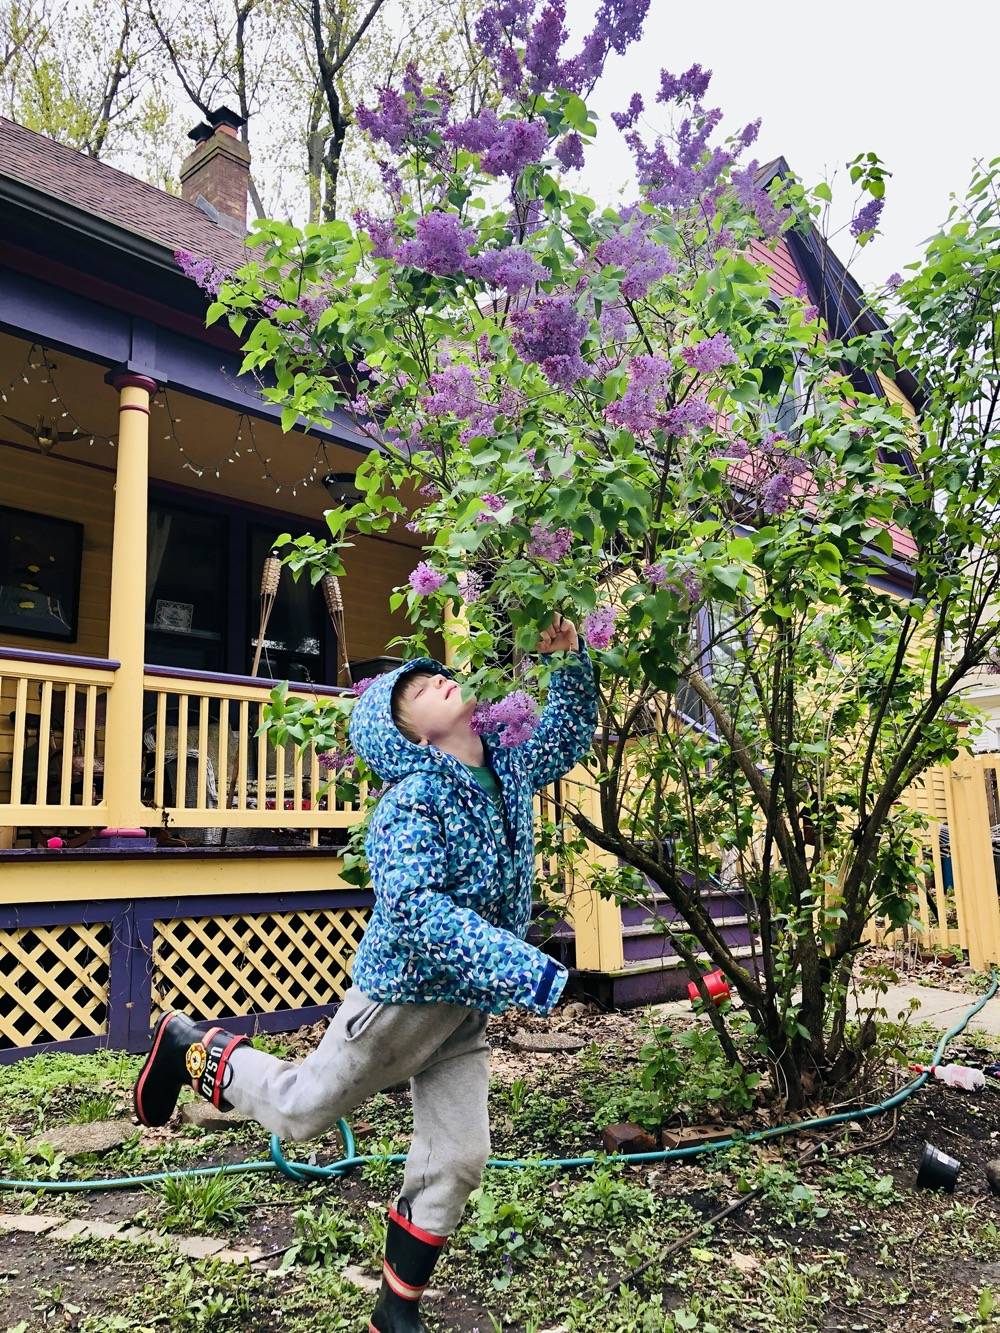 A child leans up and into a lilac bush, smelling the flowers. He is wearing a blue coat and gray sweatpants. Behind him is a yellow house with purple trim. Photo by Danielle Chynoweth. 